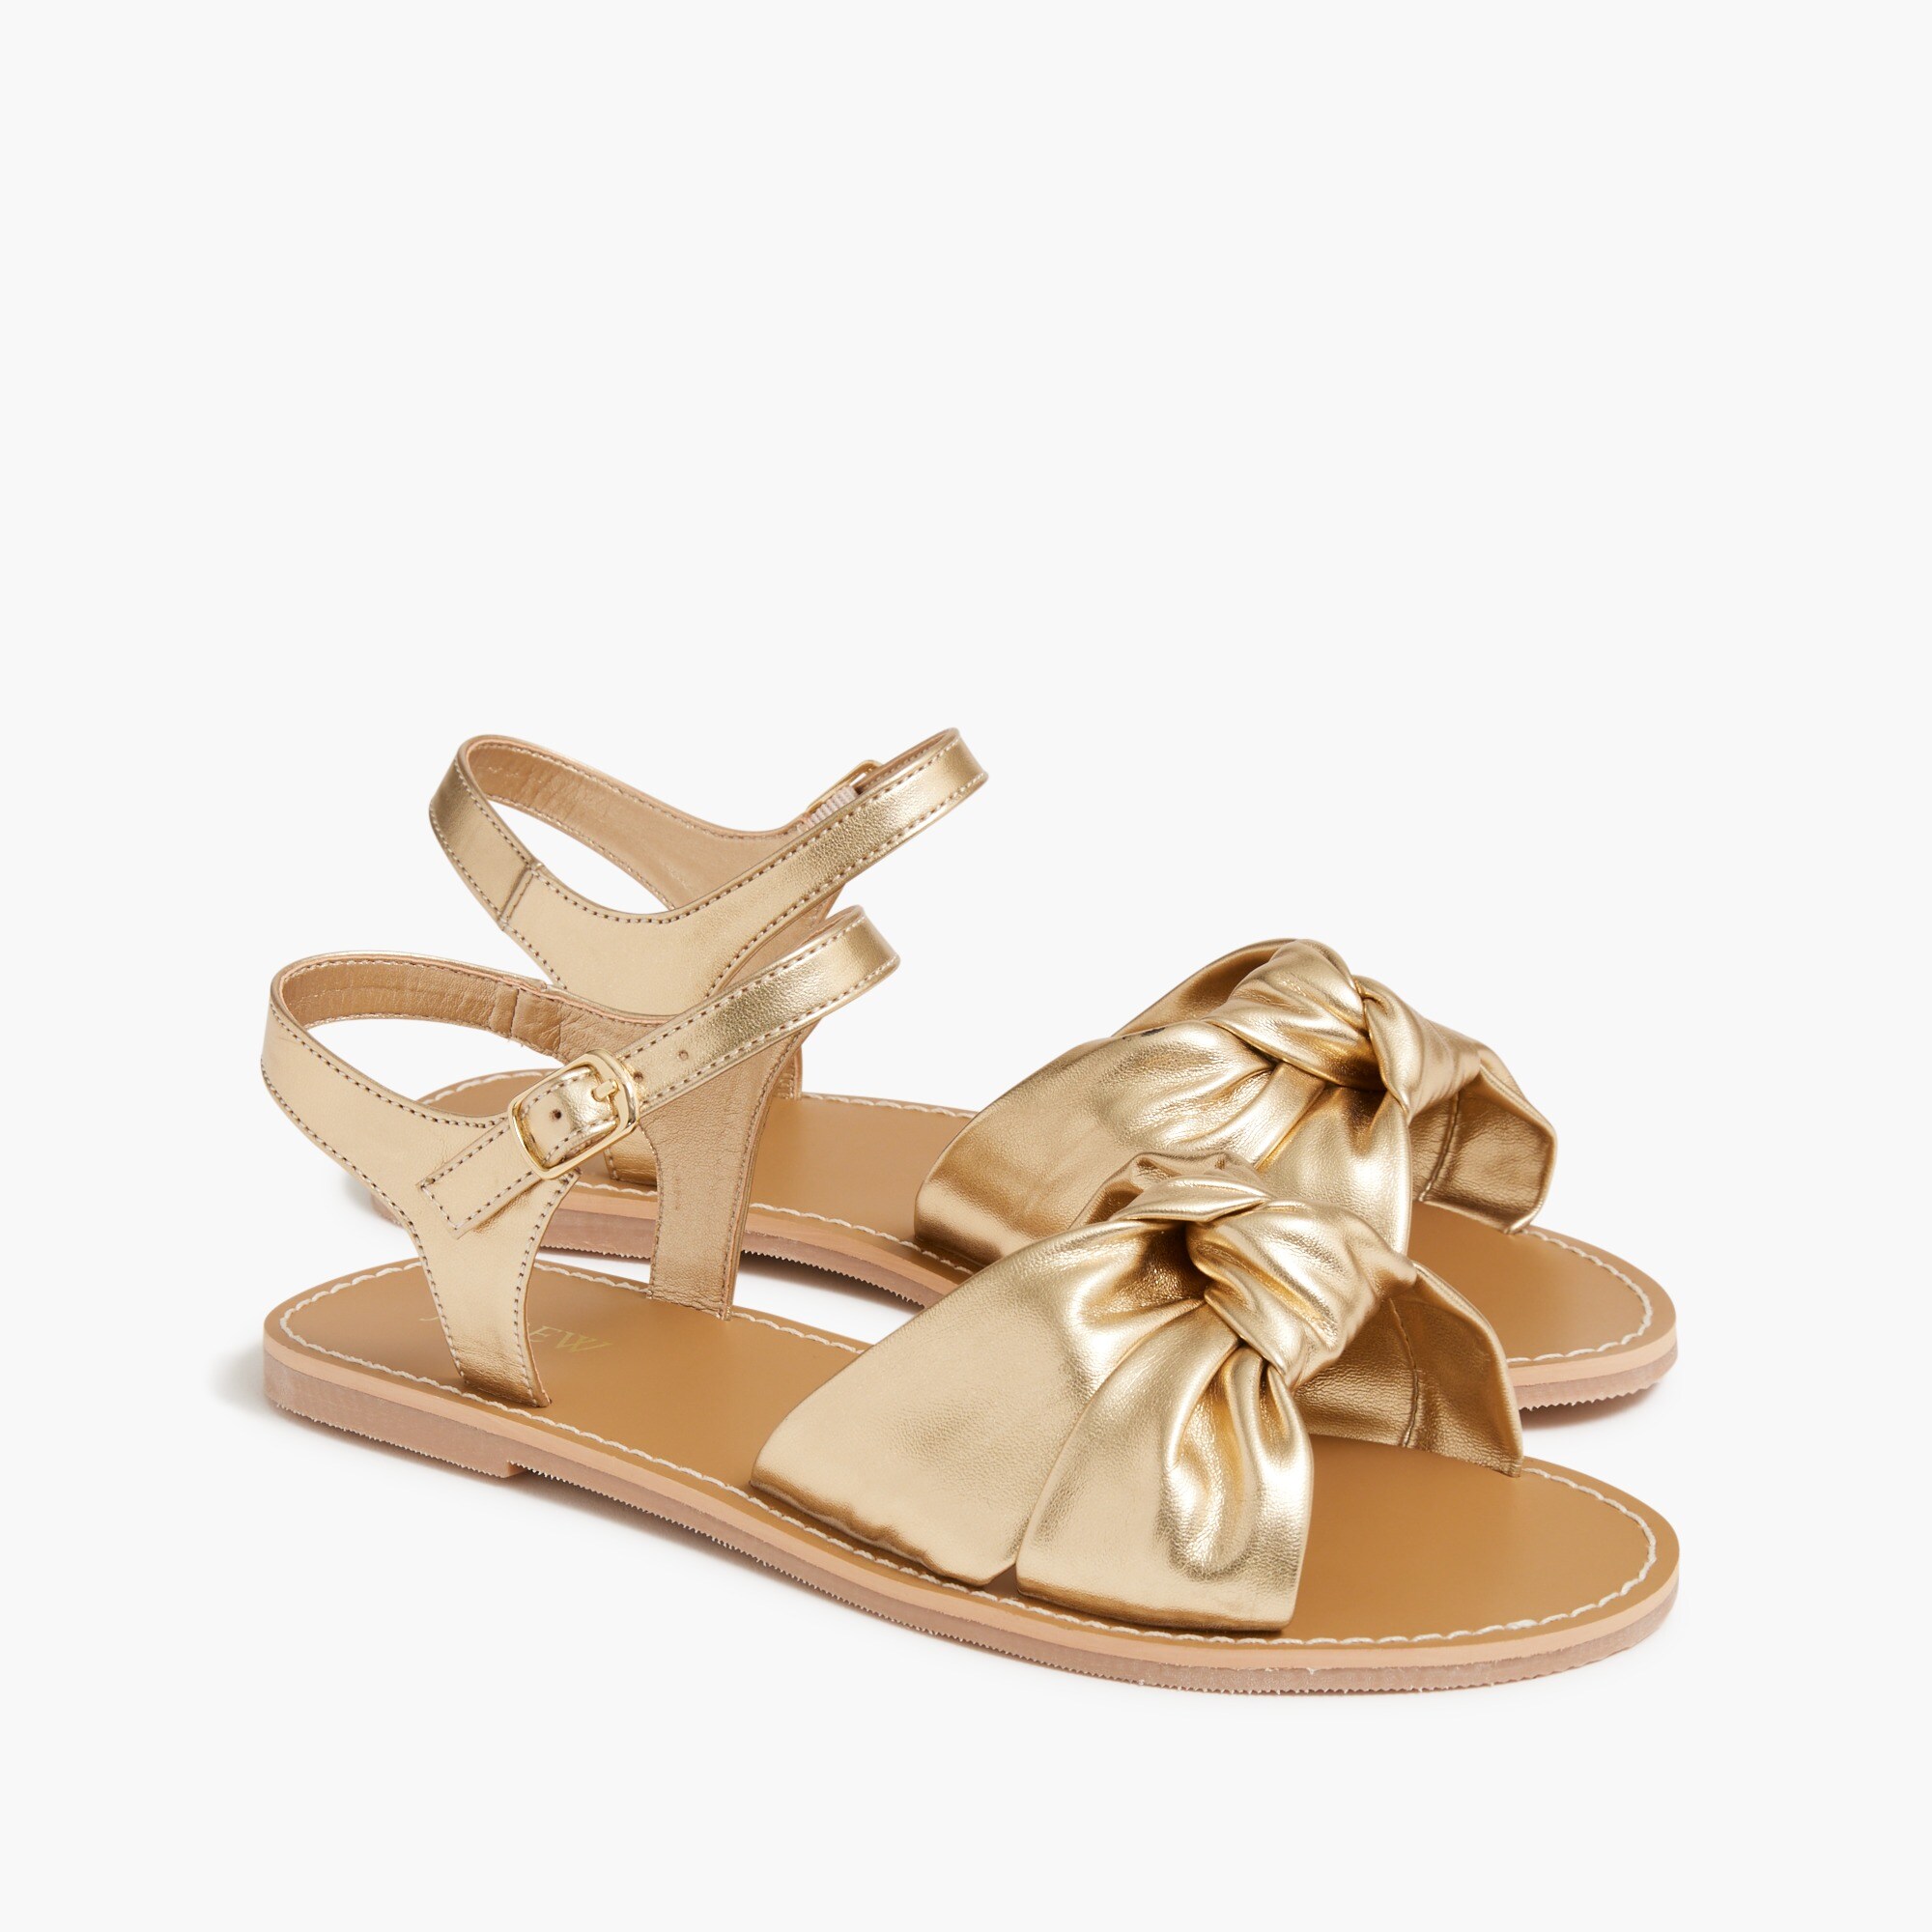 girls Girls' knot sandals with ankle strap